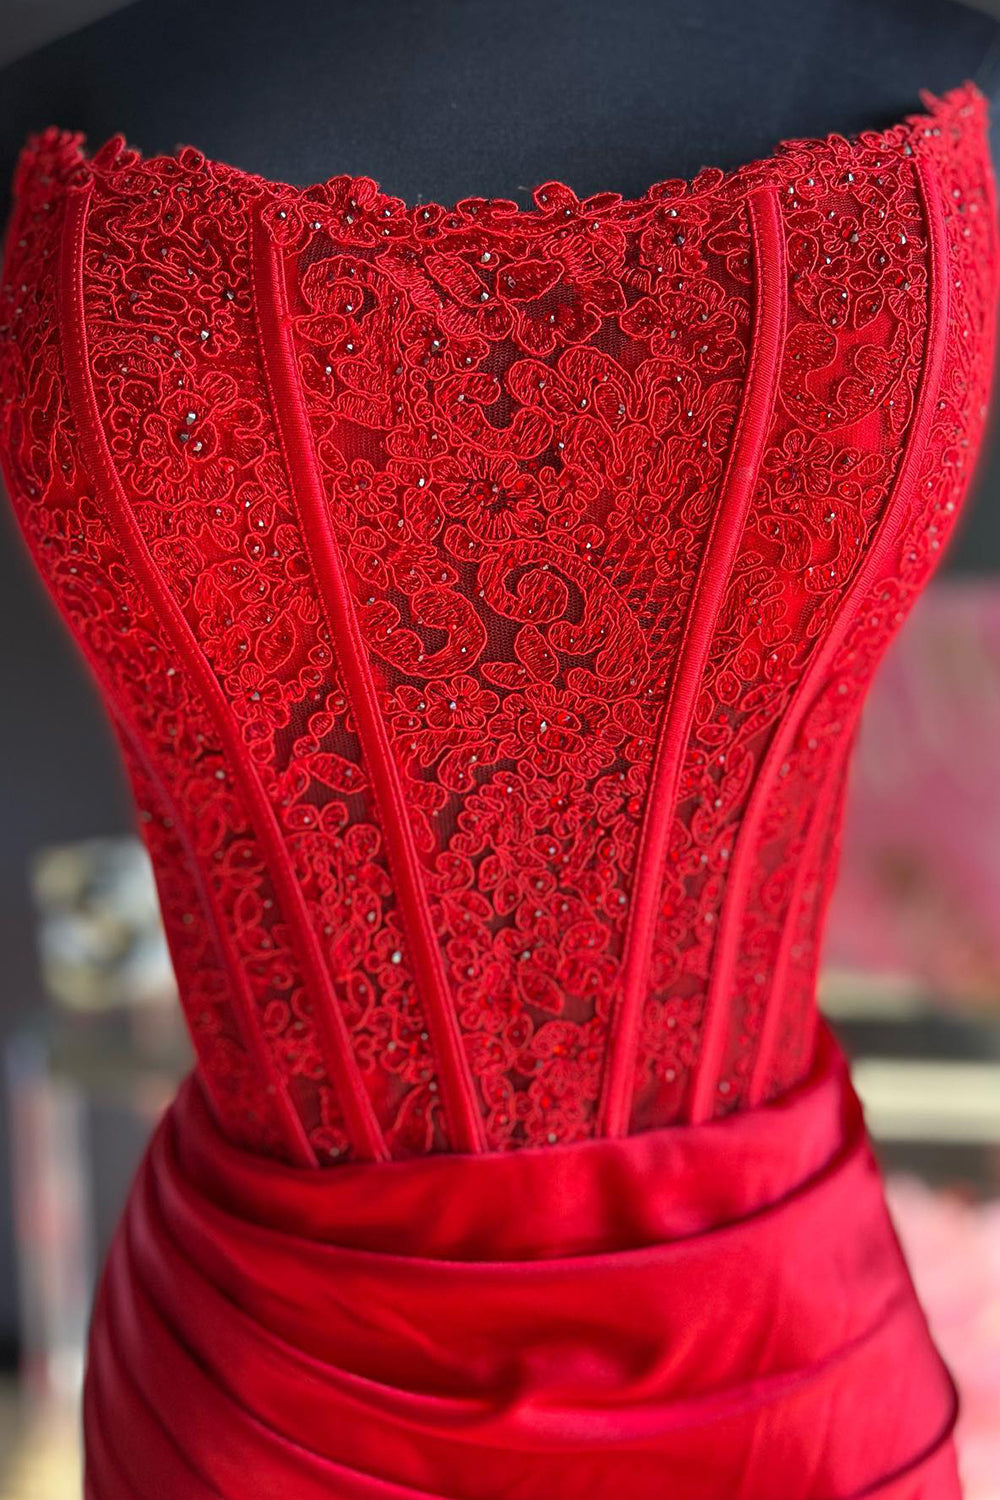 Red Lace Corset Prom Dress With Feathers, Corset Mermaid Dress, Elegant  Evening Gown, Valentine Dress, Corset Prom Dress -  Canada